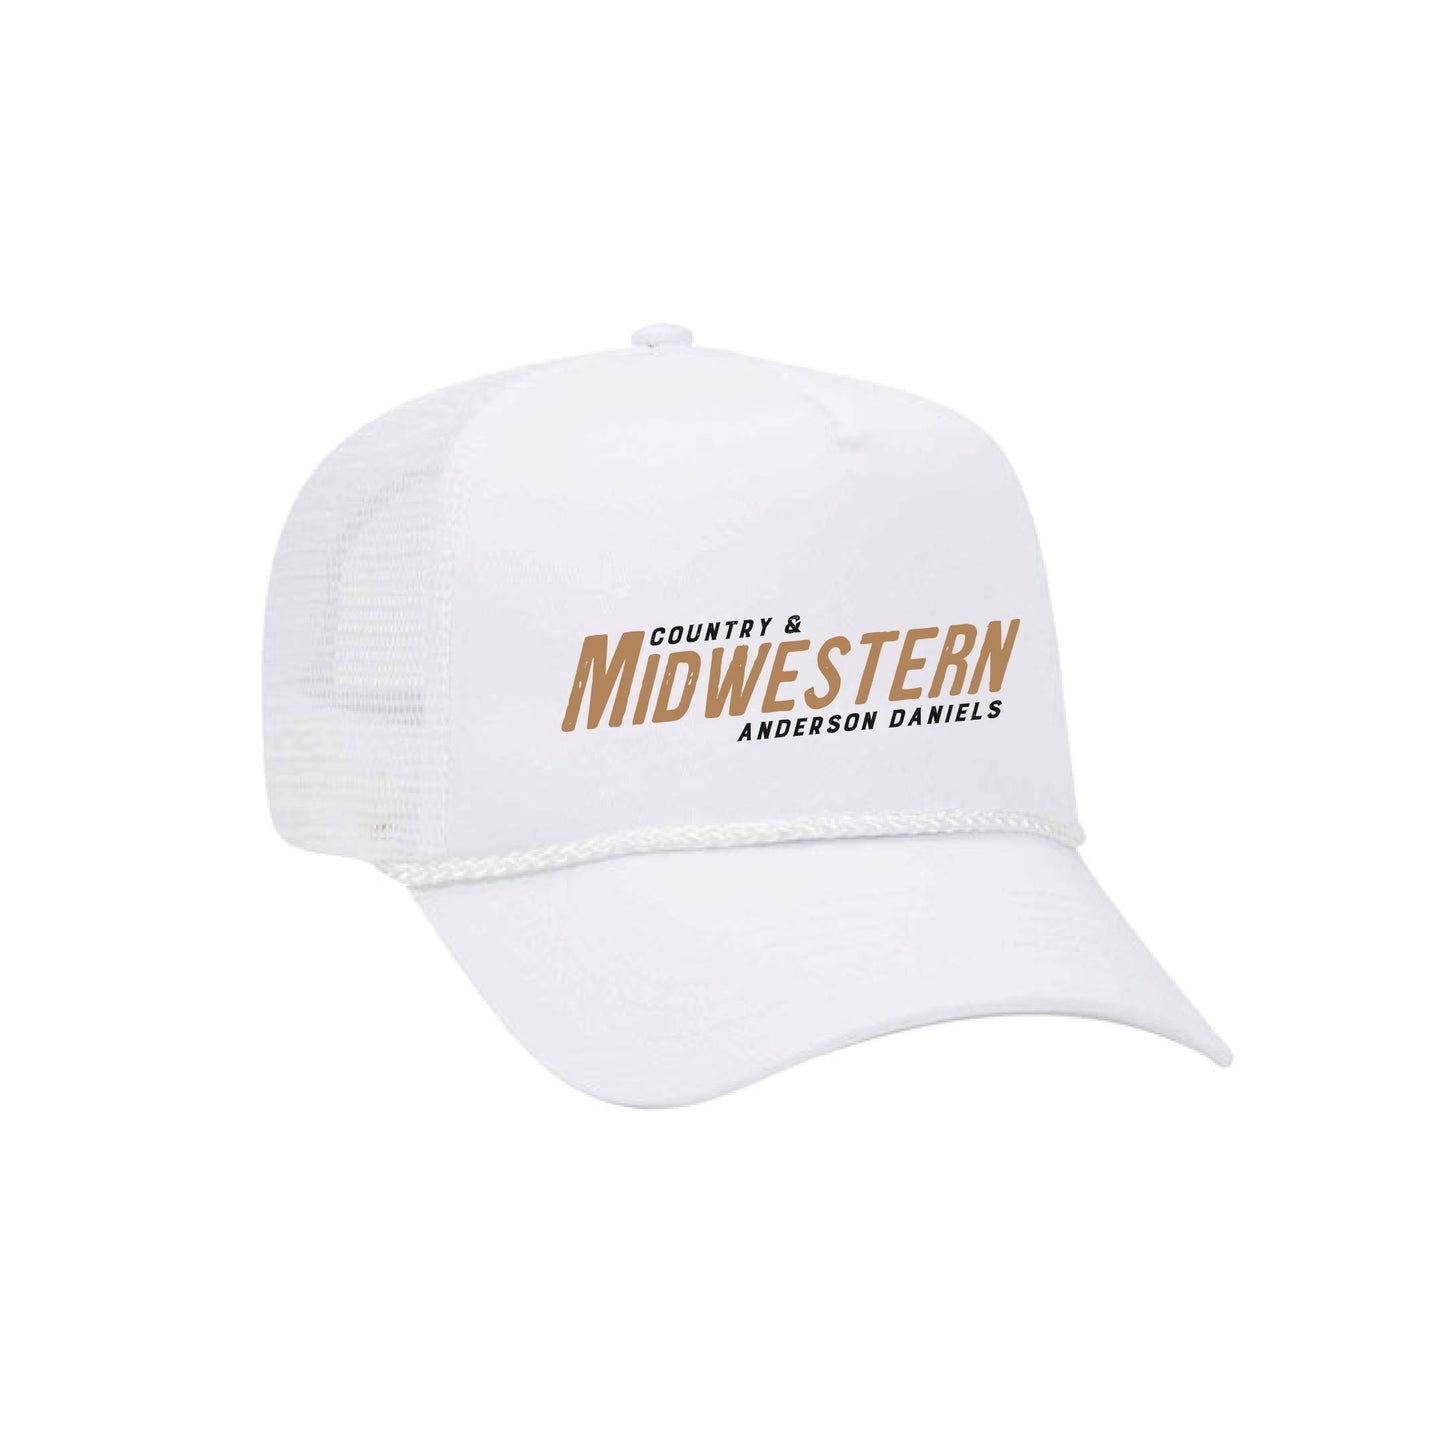 Country & Midwestern Trucker